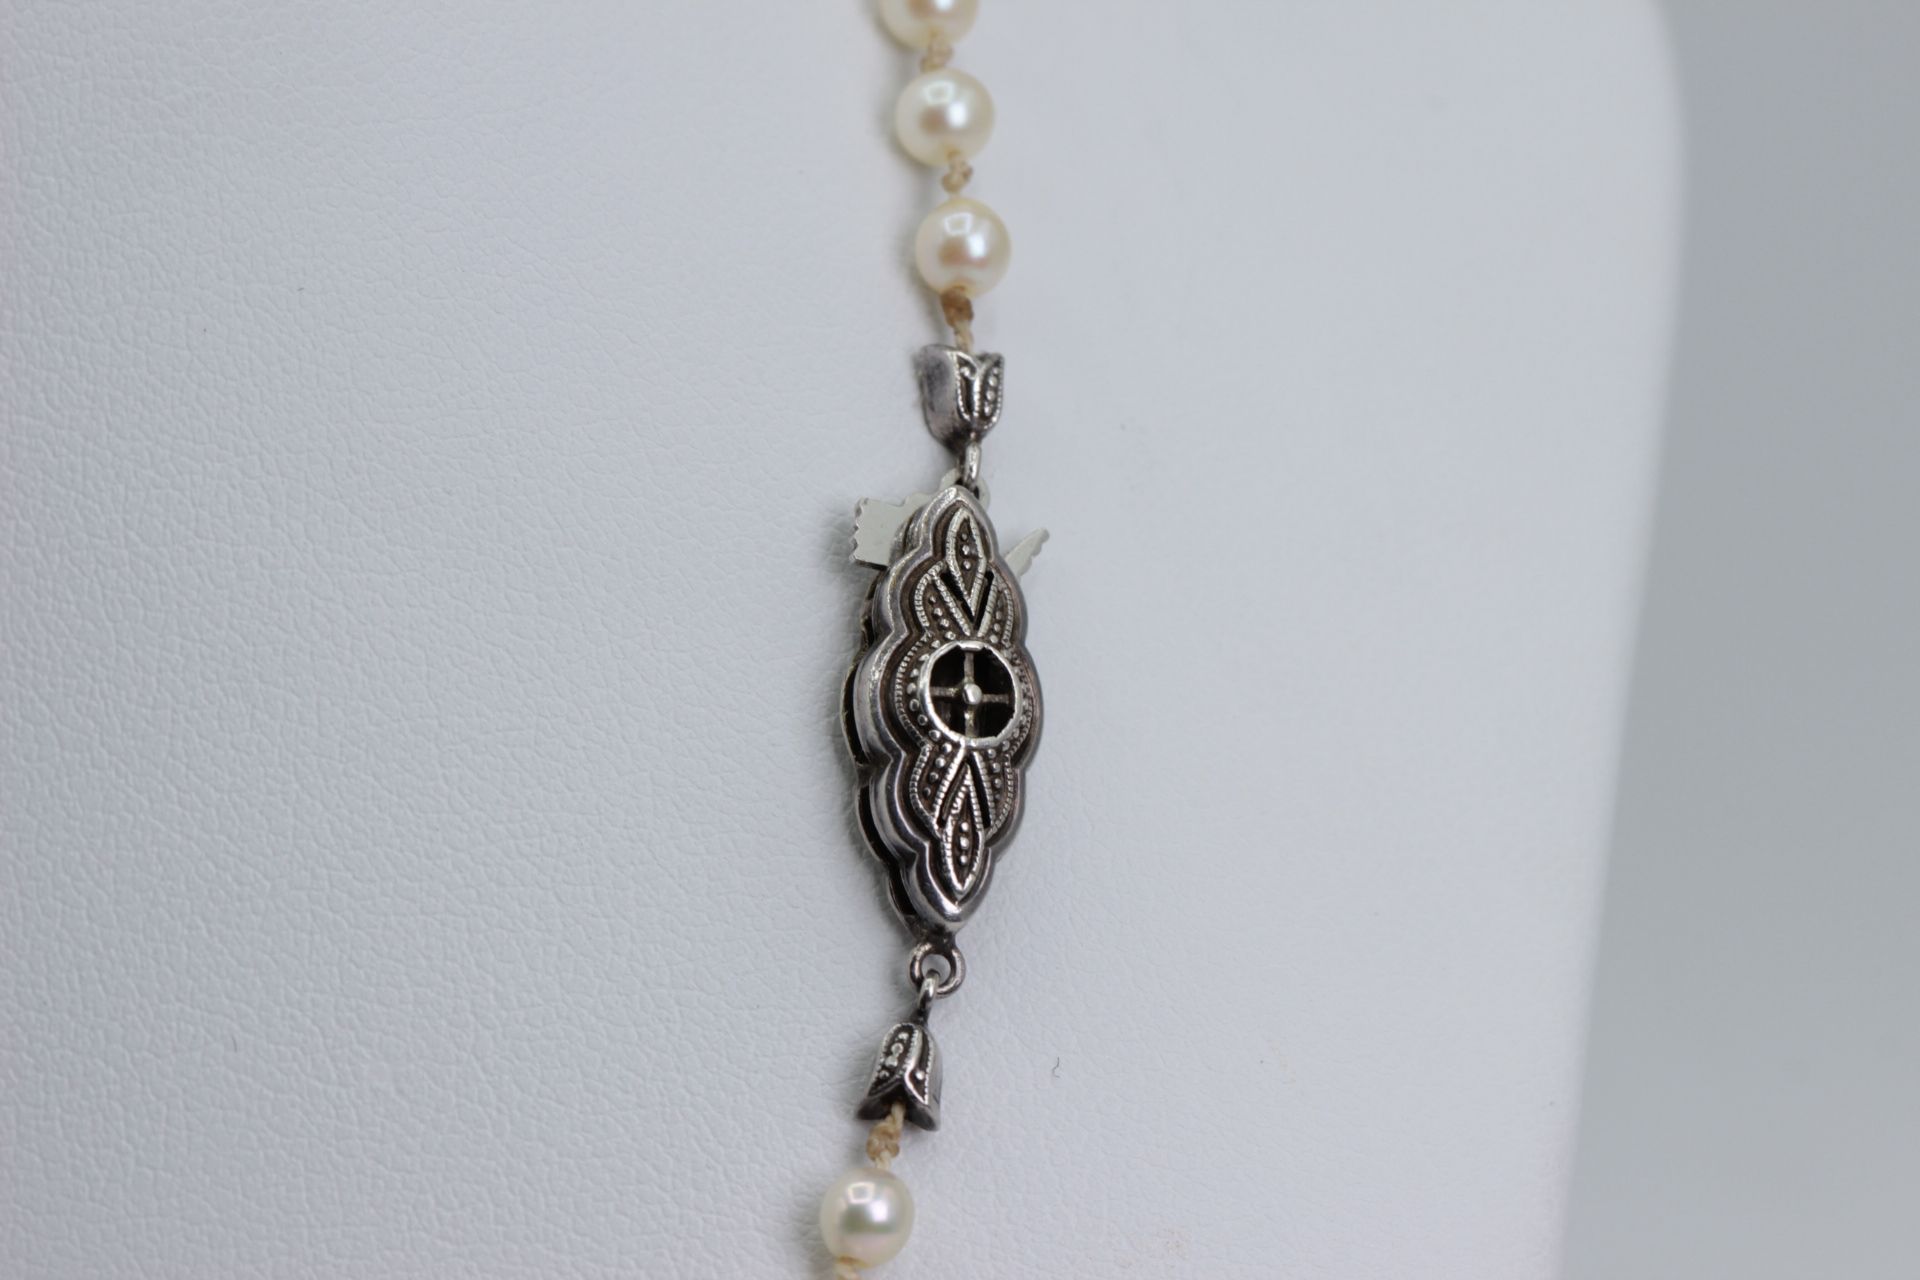 Knotted Pearl Necklace with Silver Clasp 46cm - Image 2 of 4